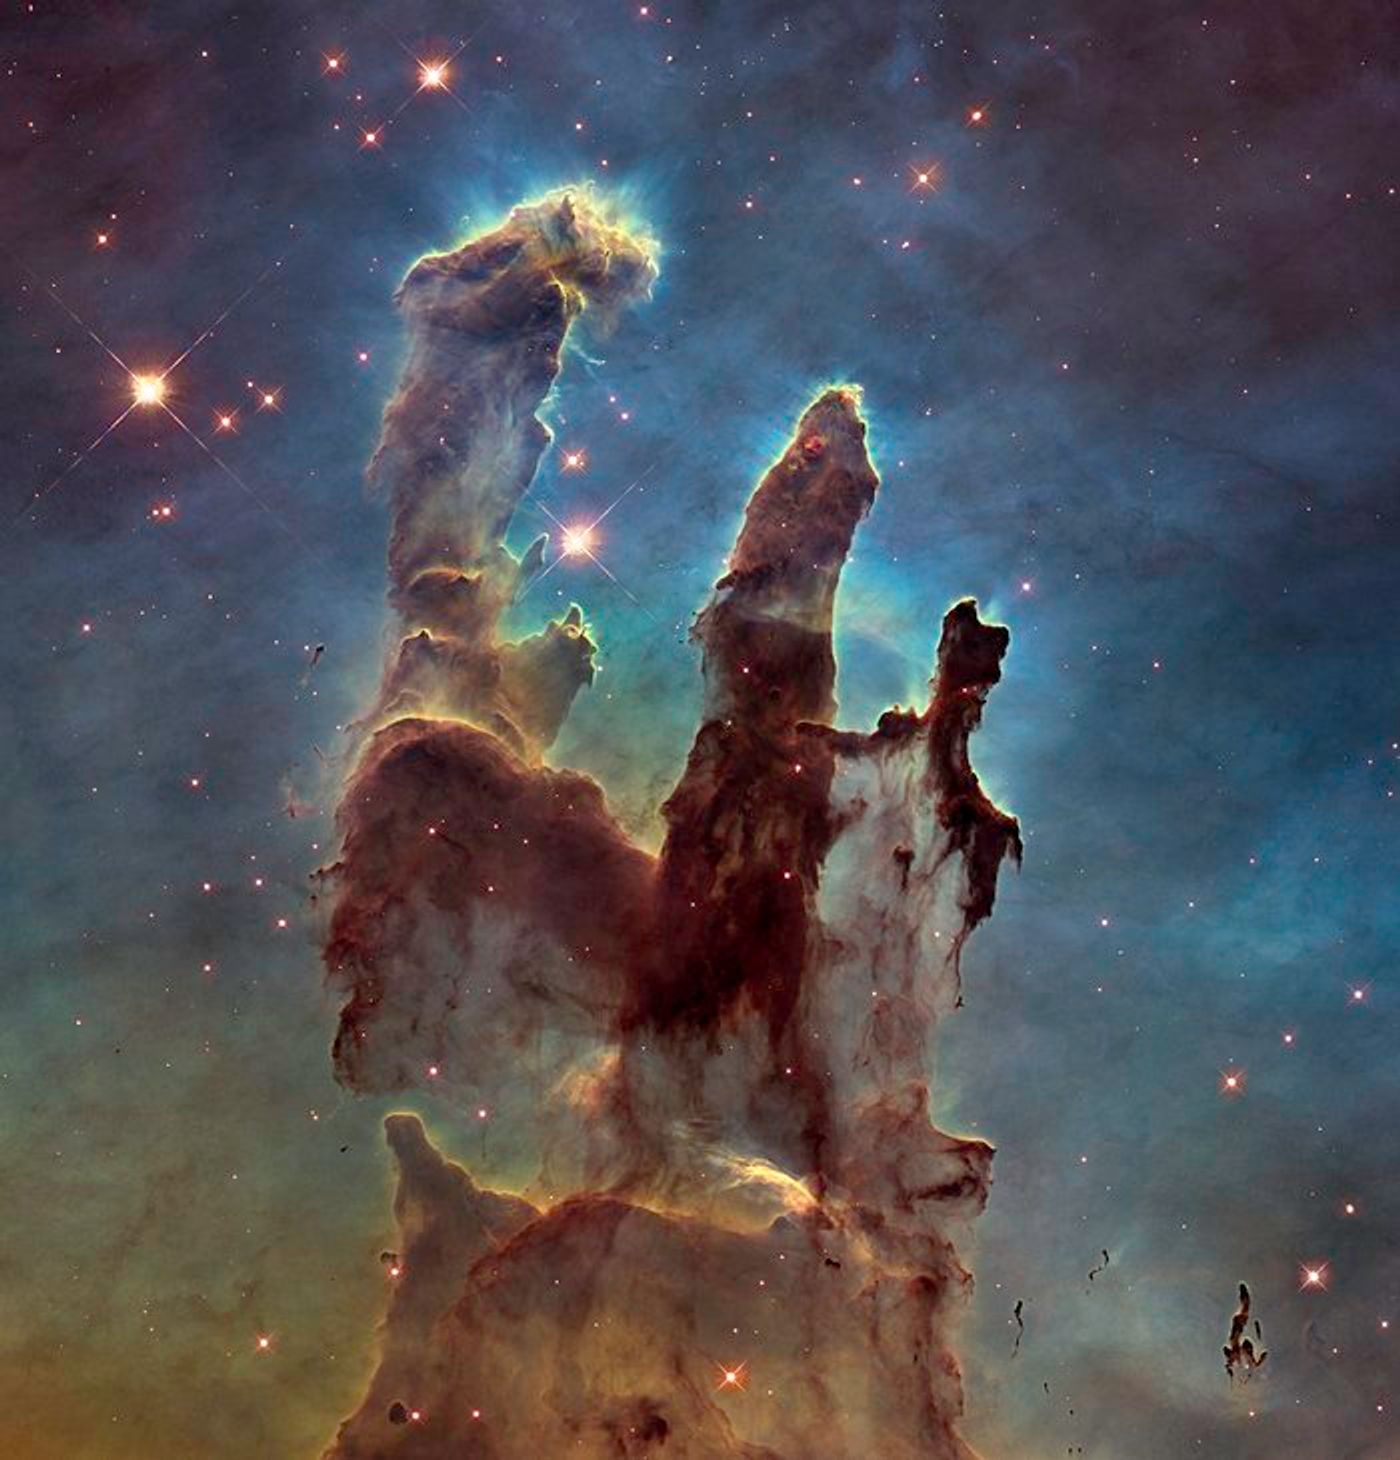 January 5, 2015: This is a revisit of one of the most iconic images that Hubble has ever taken, Eagle Nebula's Pillars of Creation. (NASA, ESA/Hubble and the Hubble Heritage Team)